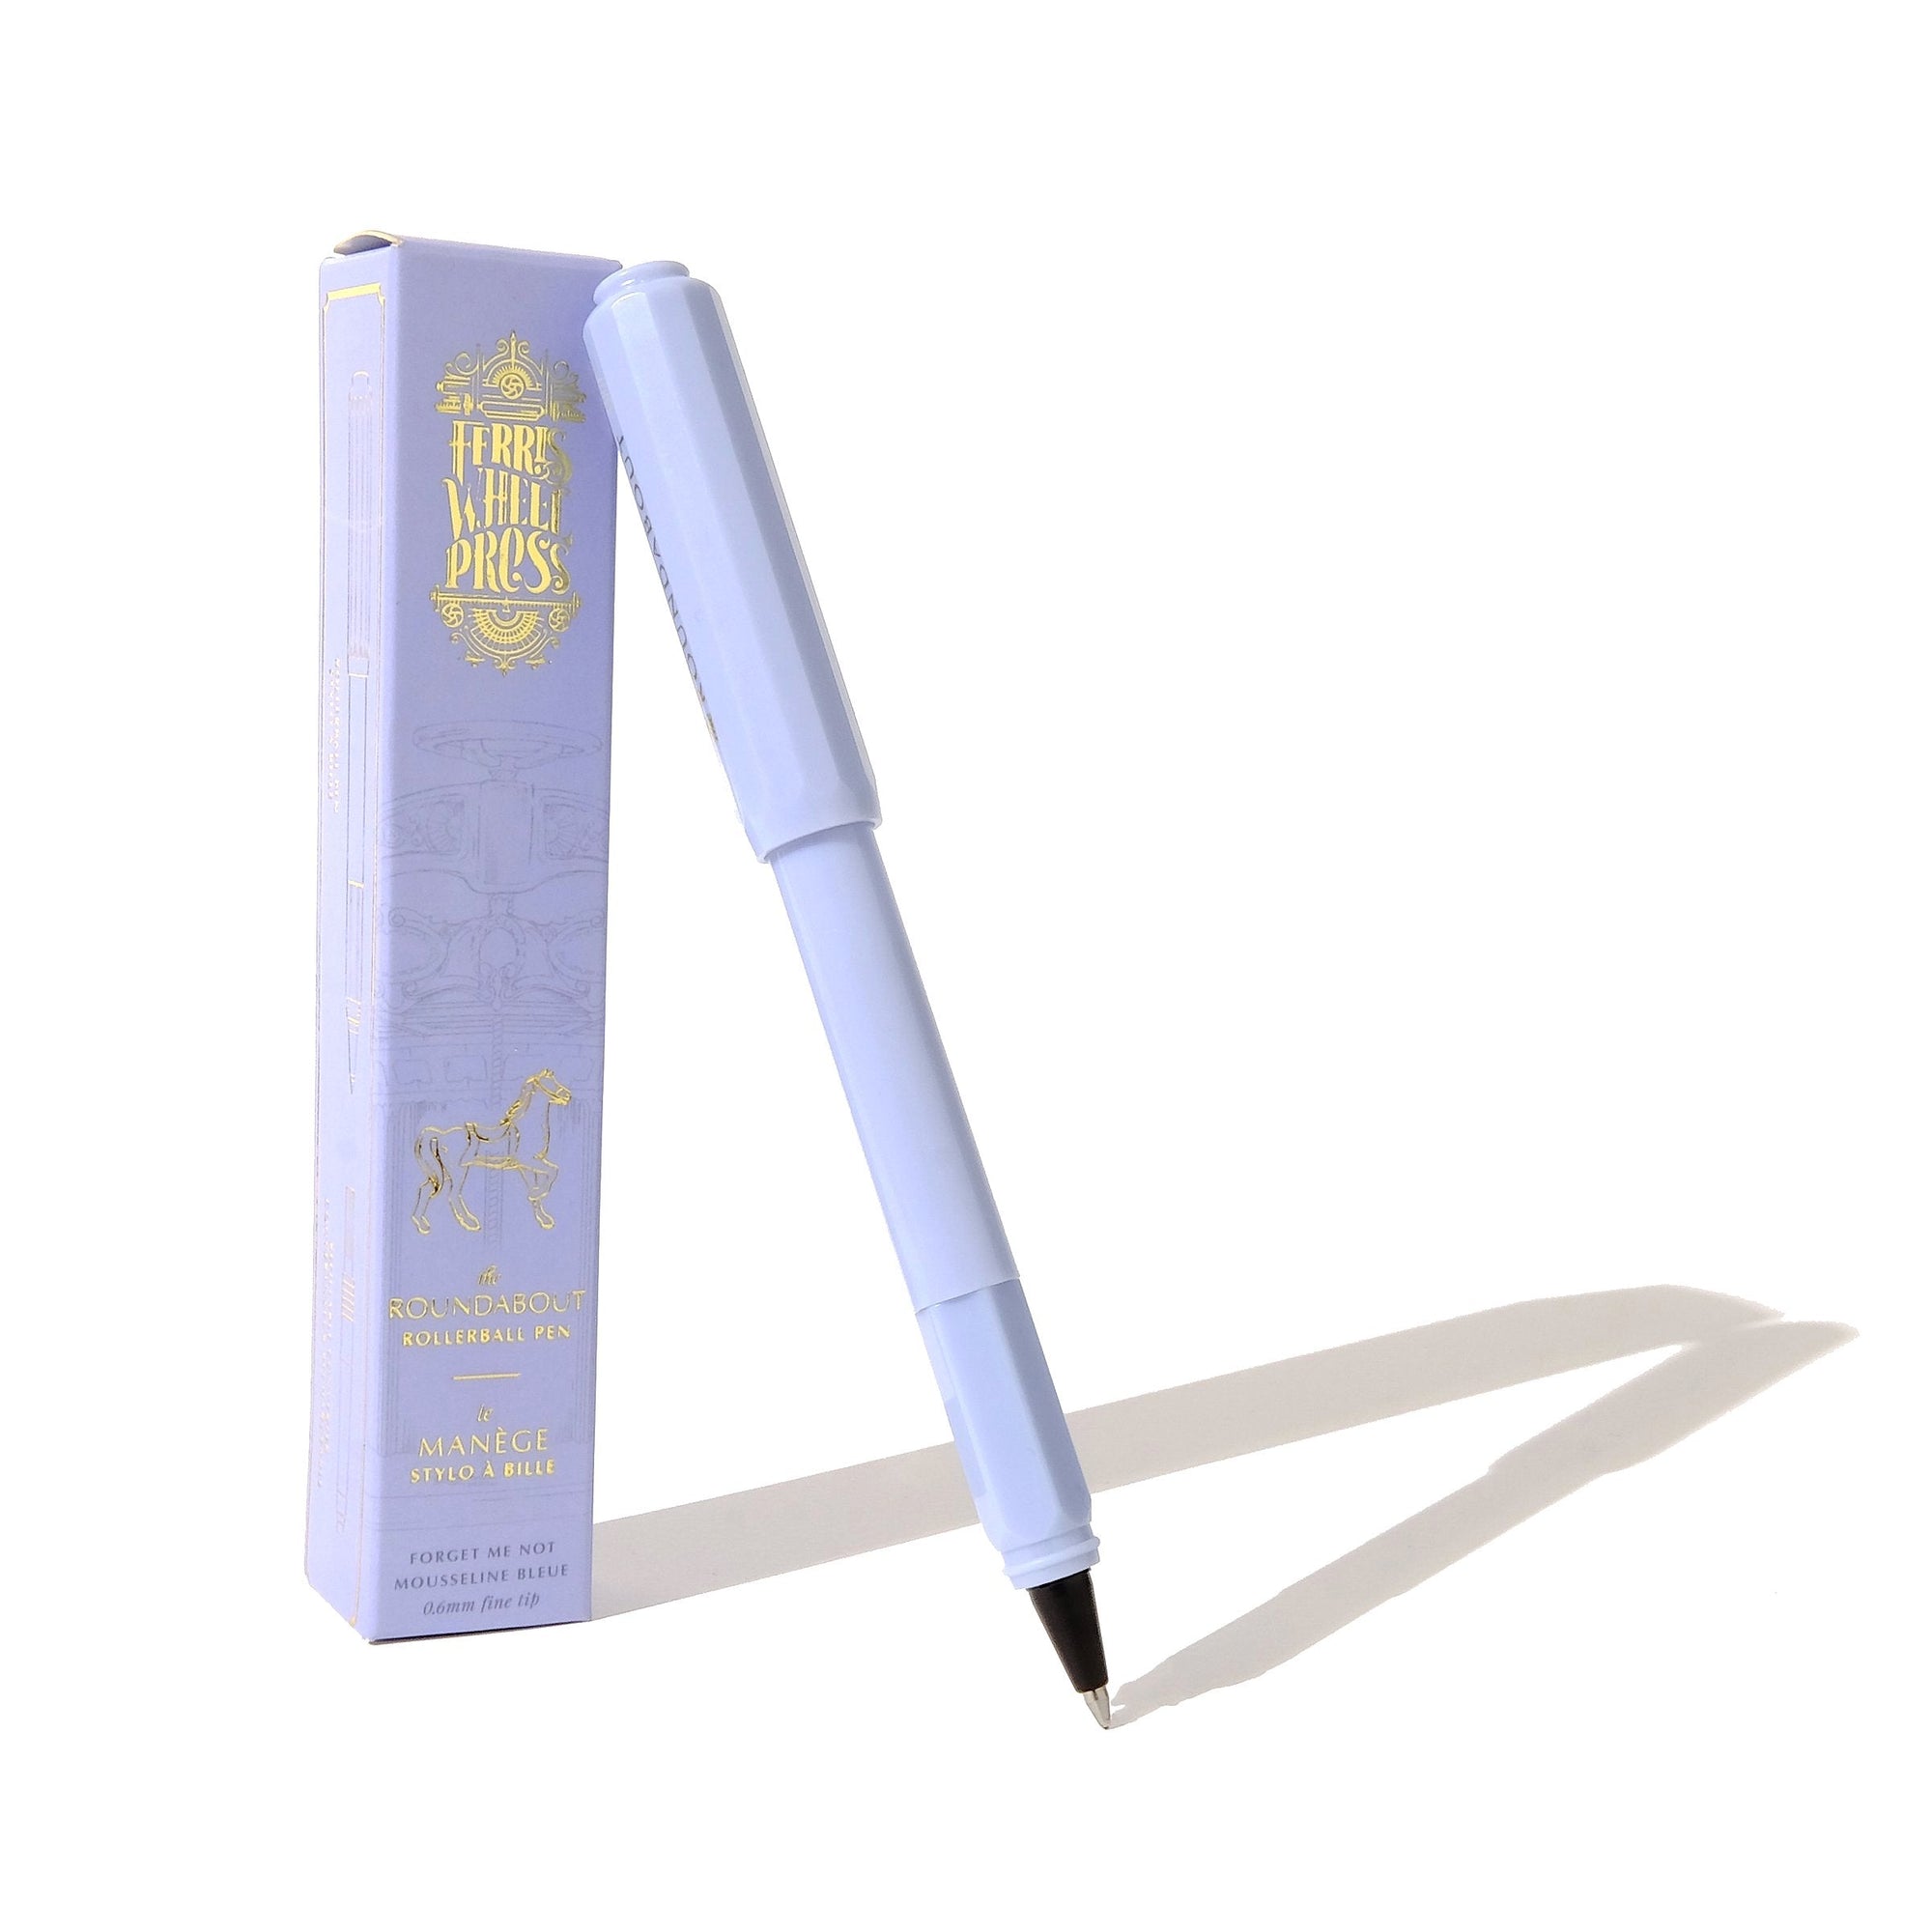 Ferris Wheel Press Roundabout Rollerball Pen with Converter Forget Me Not - Blesket Canada